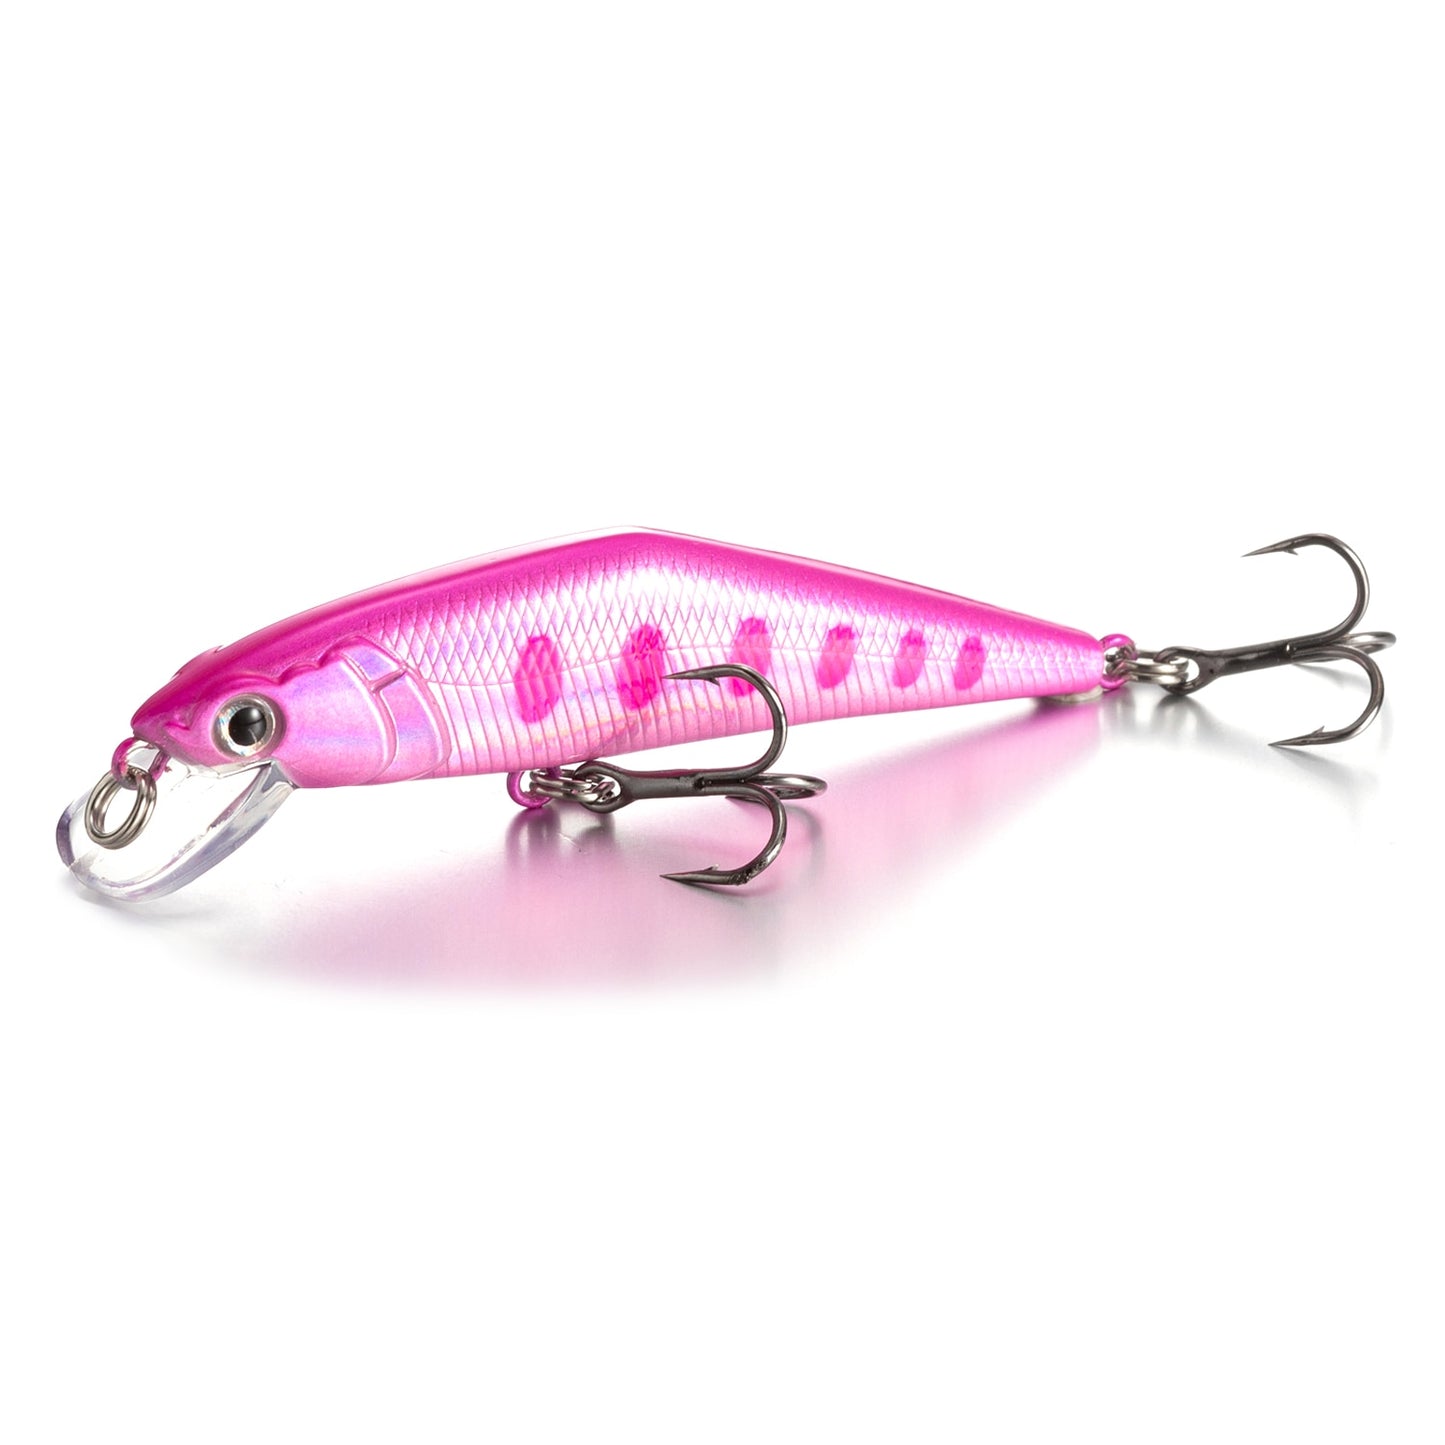 LTHTUG Japan Pesca Stream Fishing Lure 63mm 8g Sinking Minnow Peche Artificial Hard CrankBait For Bass Perch Pike Salmon Trout Lure